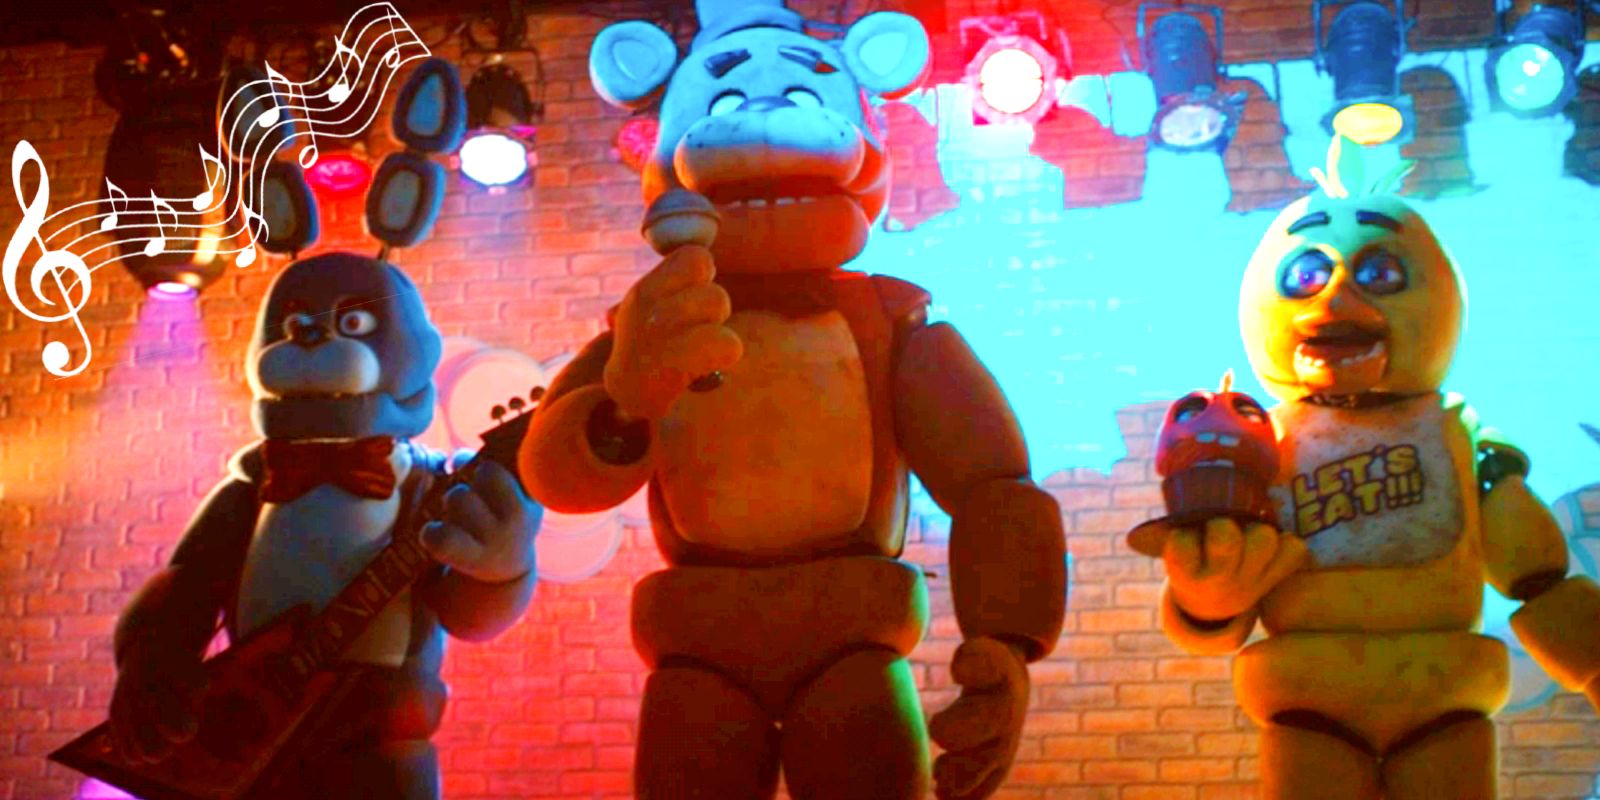 This image shows Bonnie, Freddy, and Chica performing with a music staff in the corner.